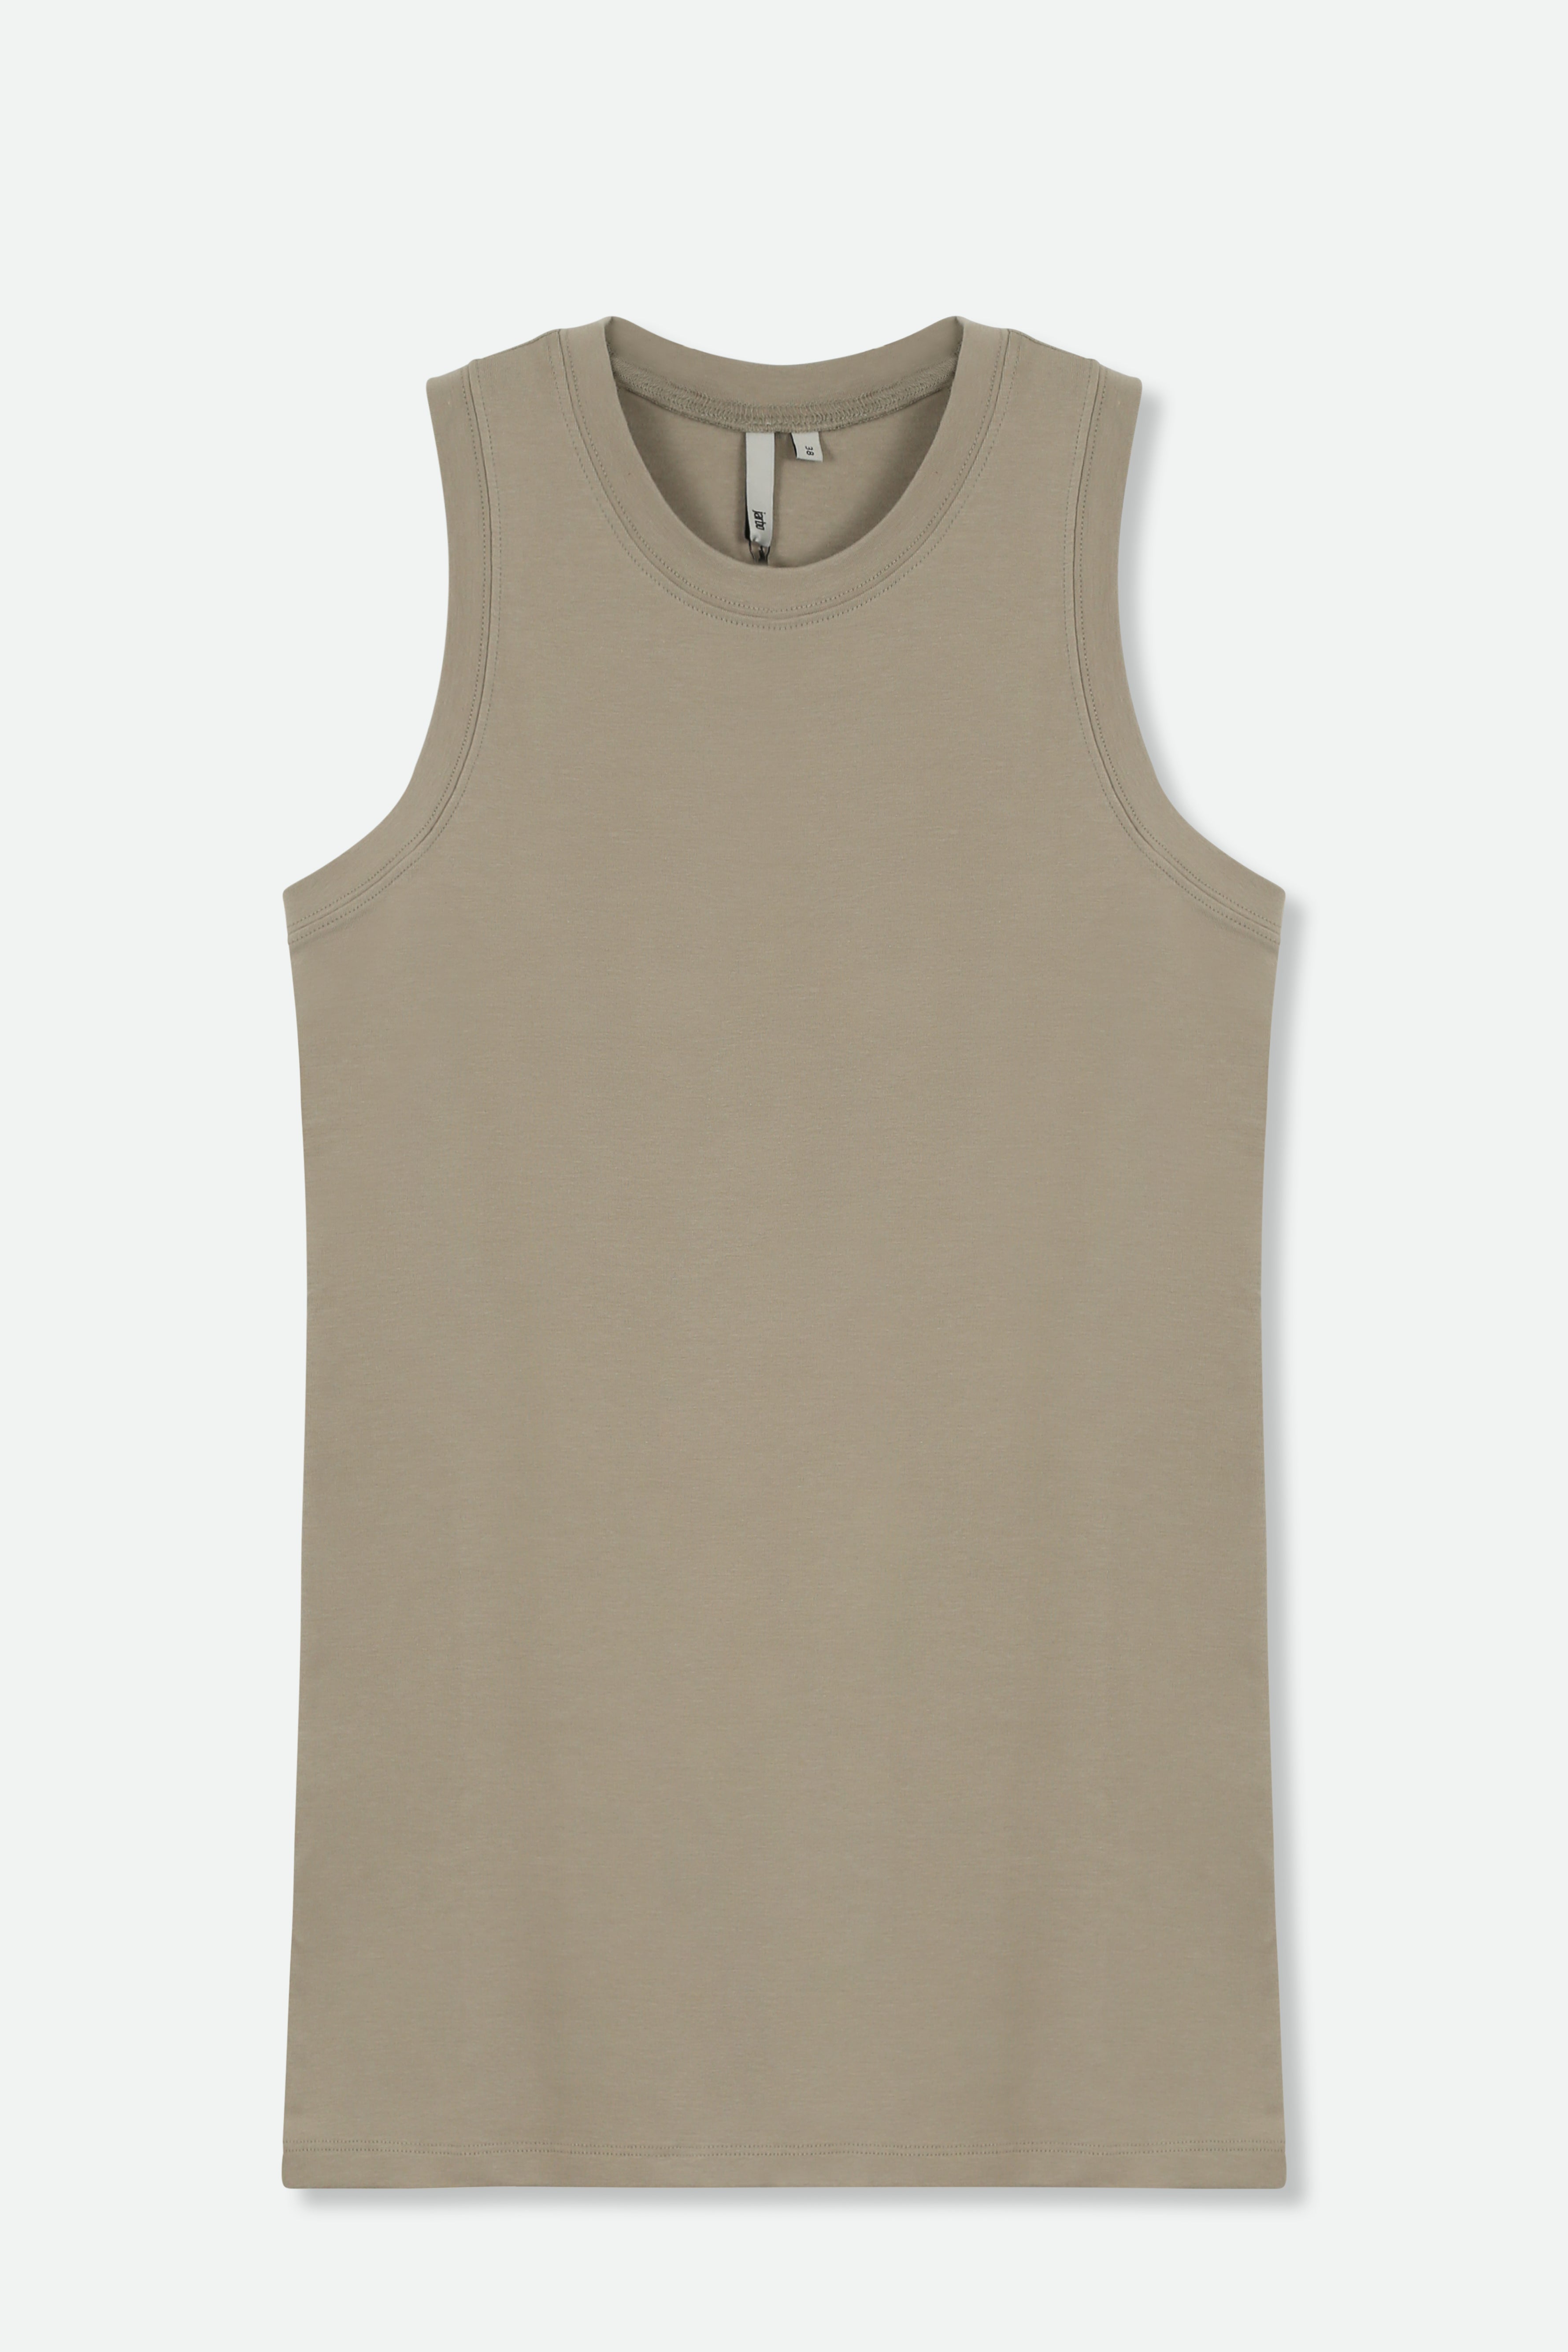 TUNIC LENGTH MUSCLE TANK IN PIMA COTTON STRETCH - Final Few Sizes US 6-10 - Jarbo